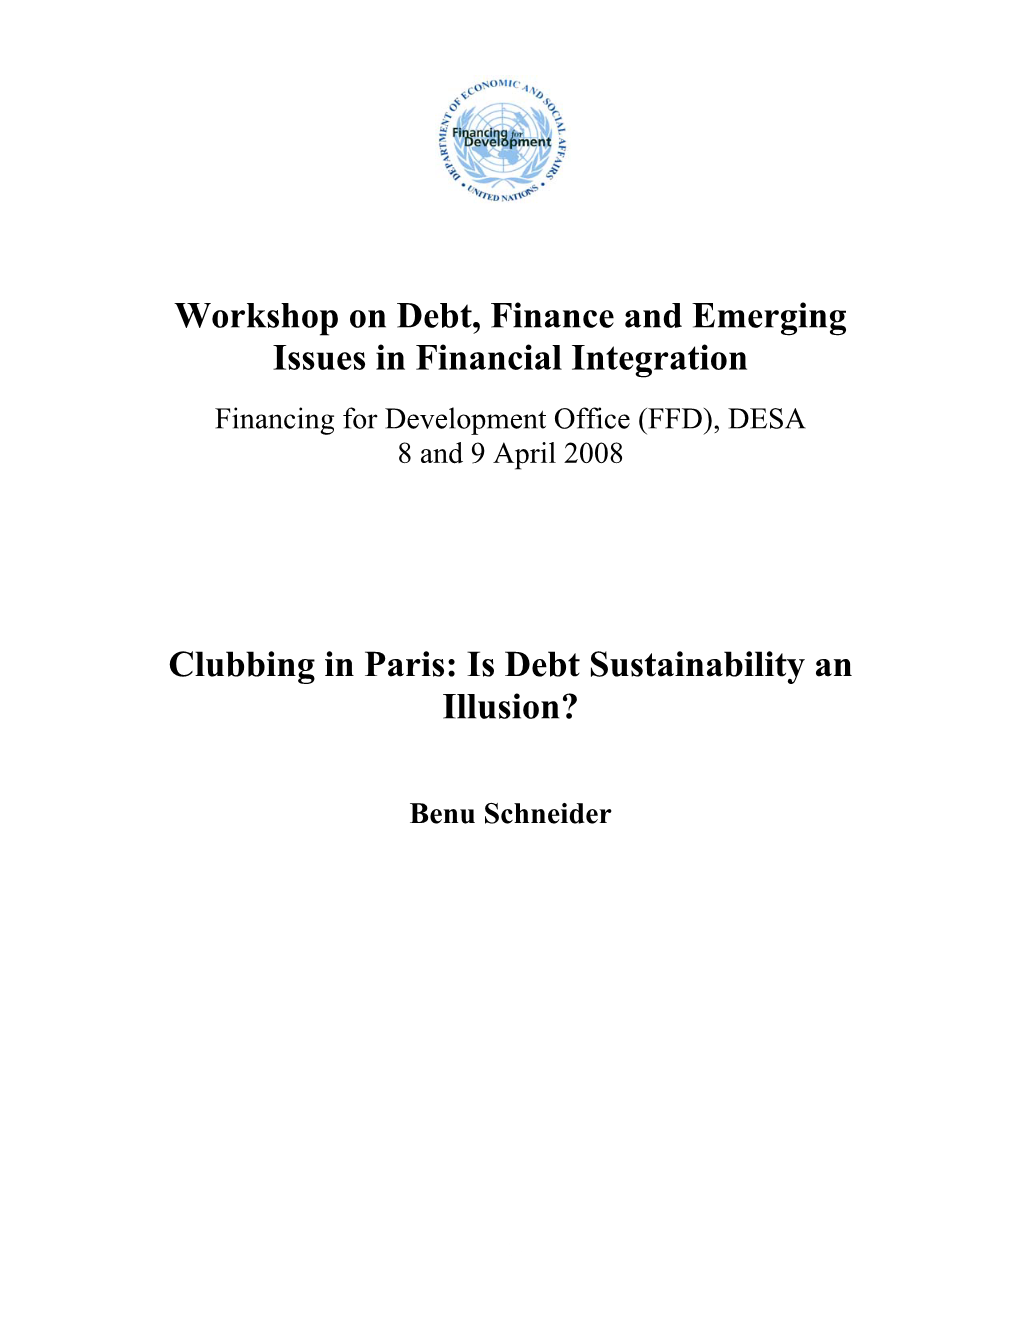 Workshop on Debt, Finance and Emerging Issues in Financial Integration